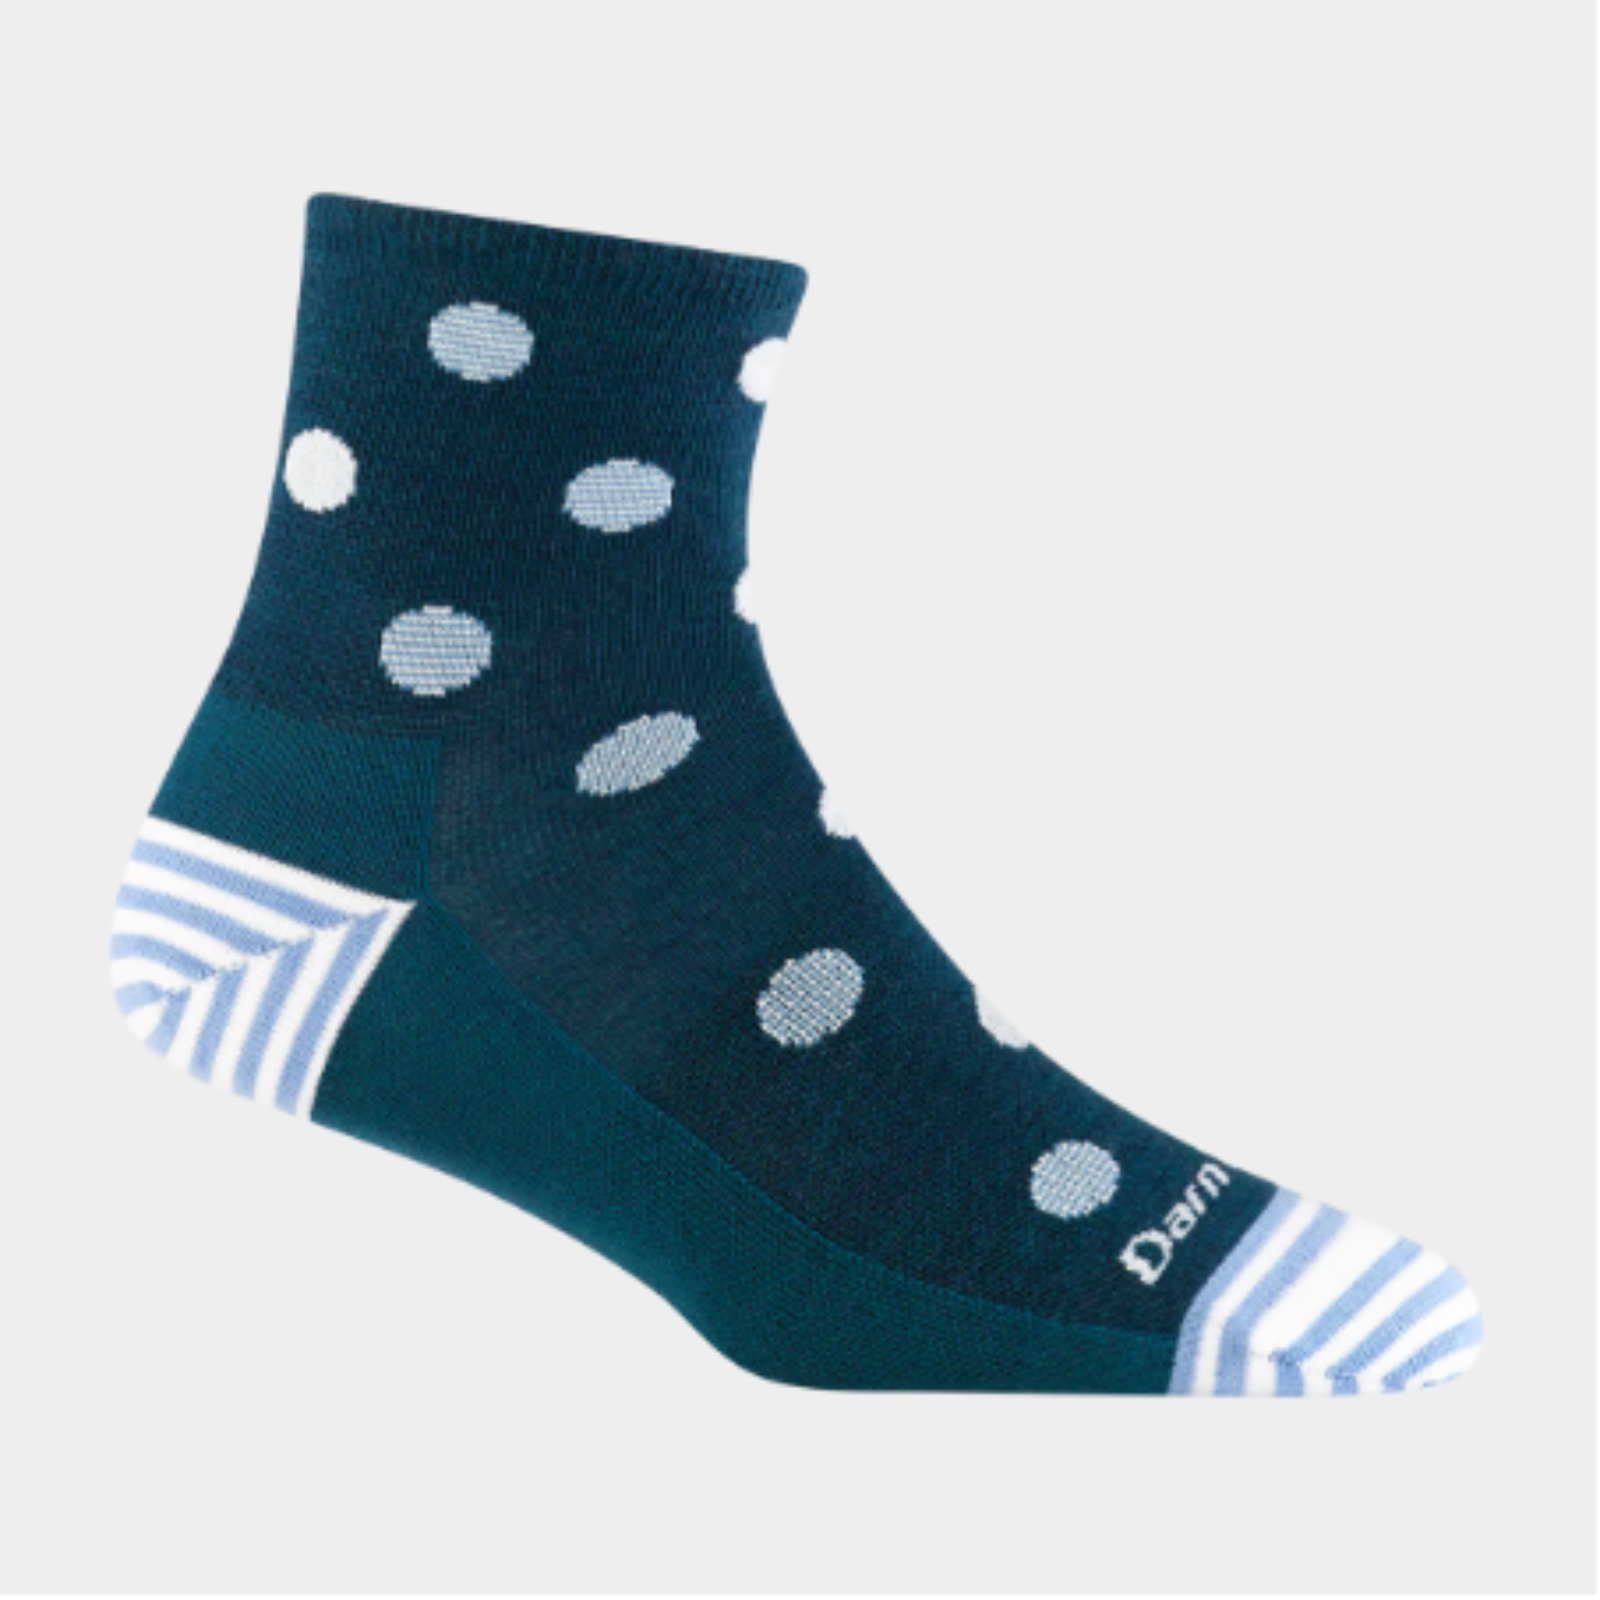 Darn Tough 6103 Dottie Shorty Lightweight Lifestyle women's quarter-height sock featuring teal blue sock with light blue polka dots all over. Sock shown on display foot. 